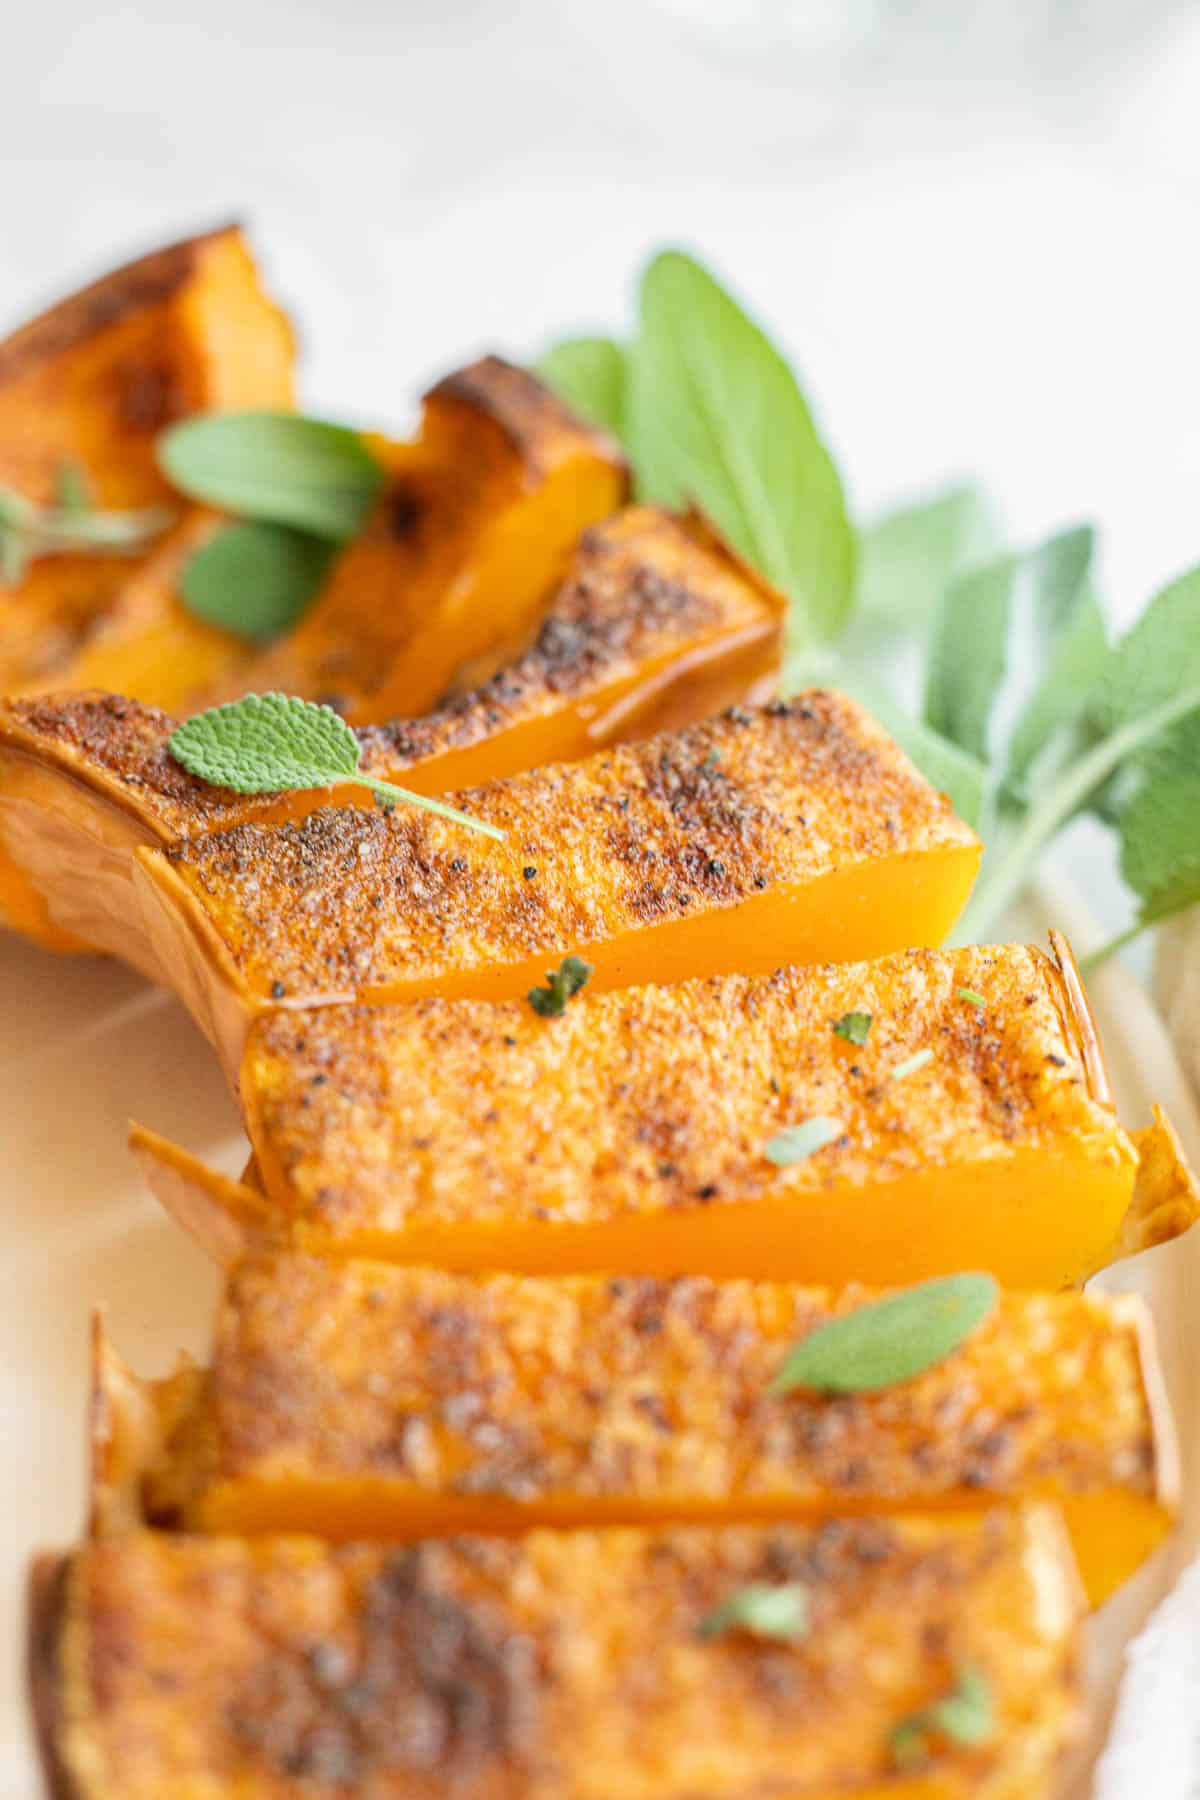 seasoned butternut squash topped with sage leaves.